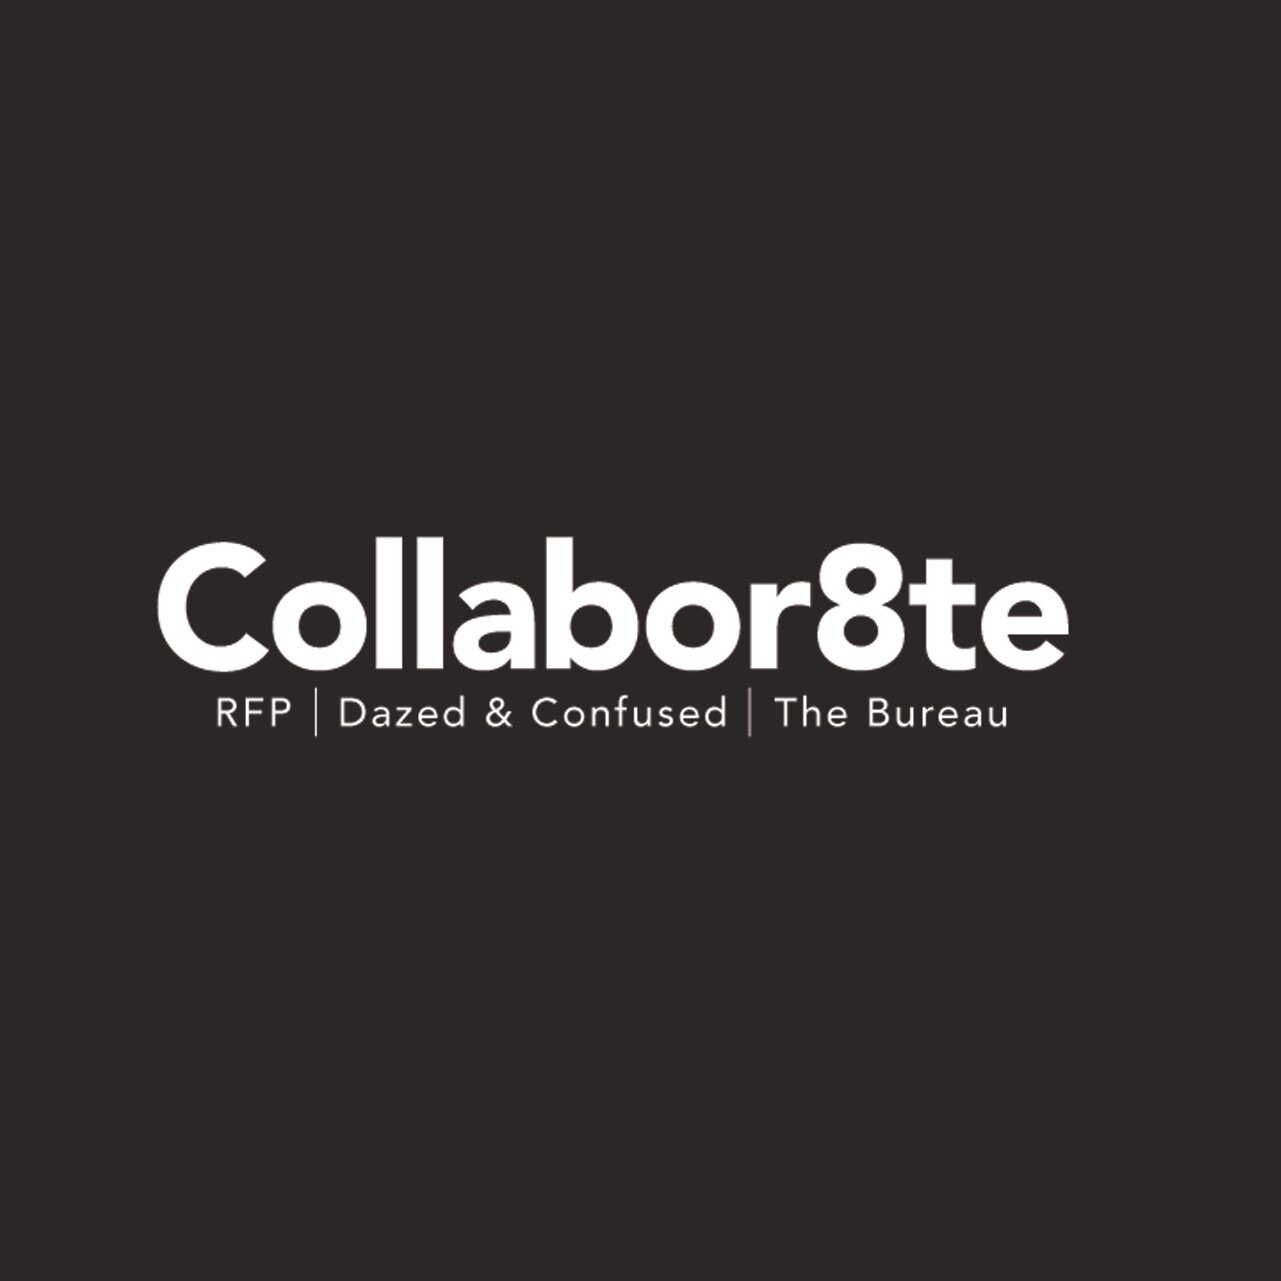 Championing new talent, Collabor8te is an exciting platform for short filmmaking; from script development through to production and distribution.